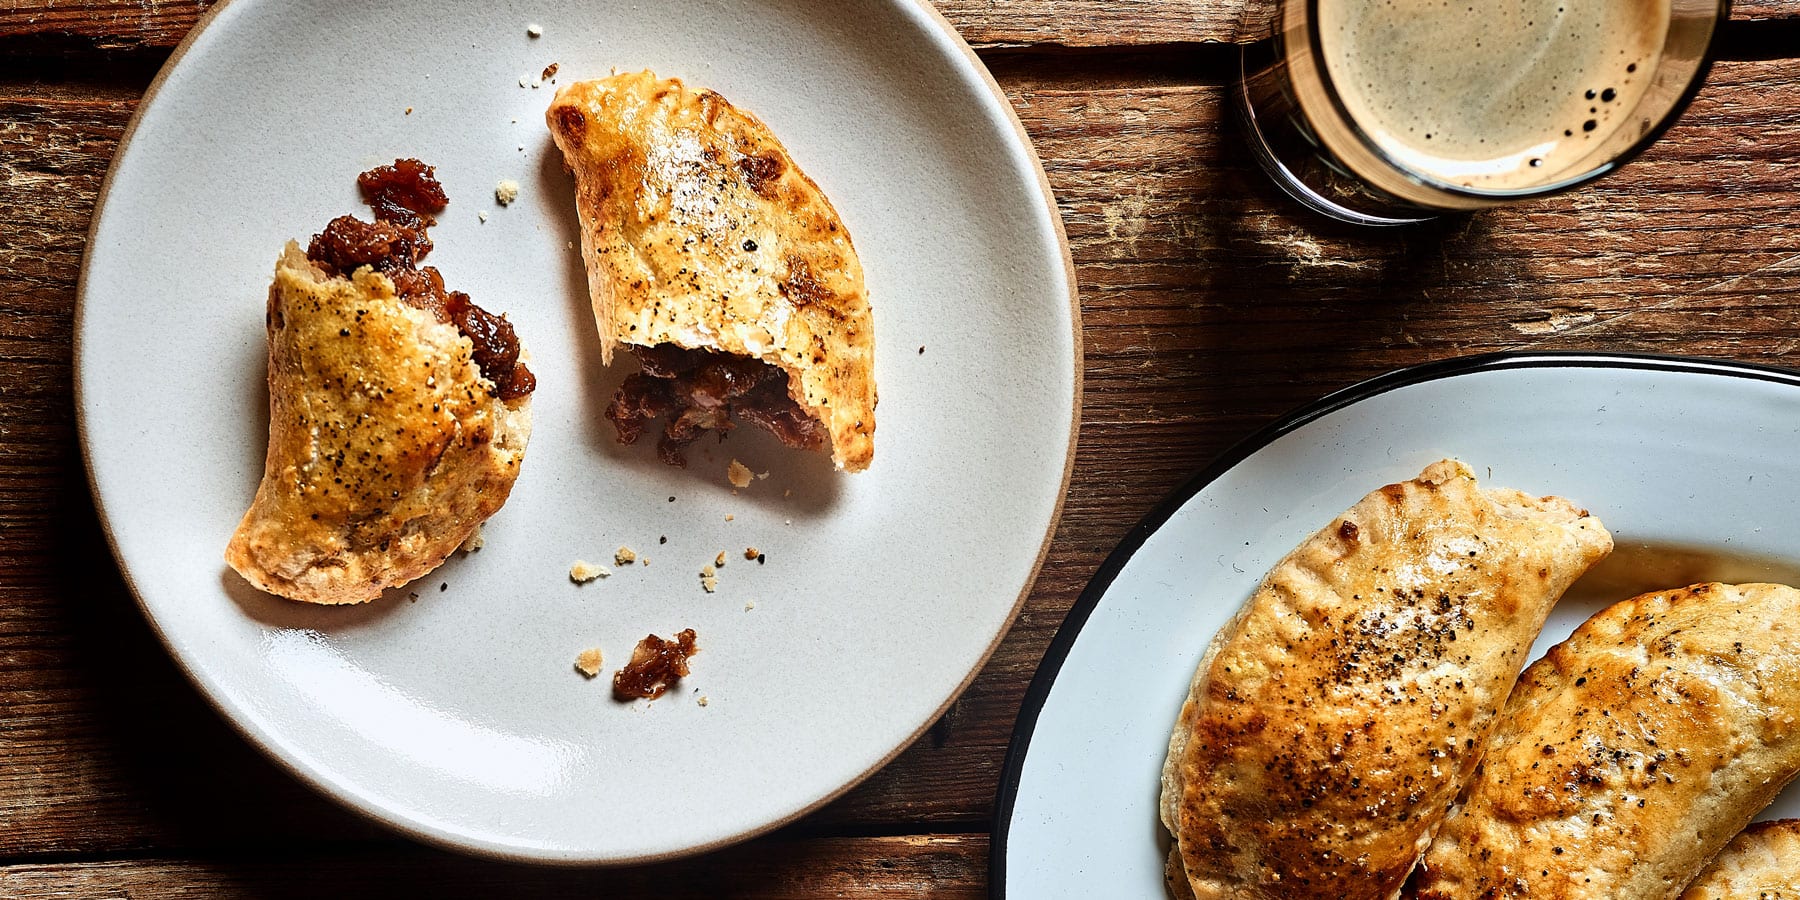 Apple recipes include these peppery apple hand pies, served on a plate with a stout.